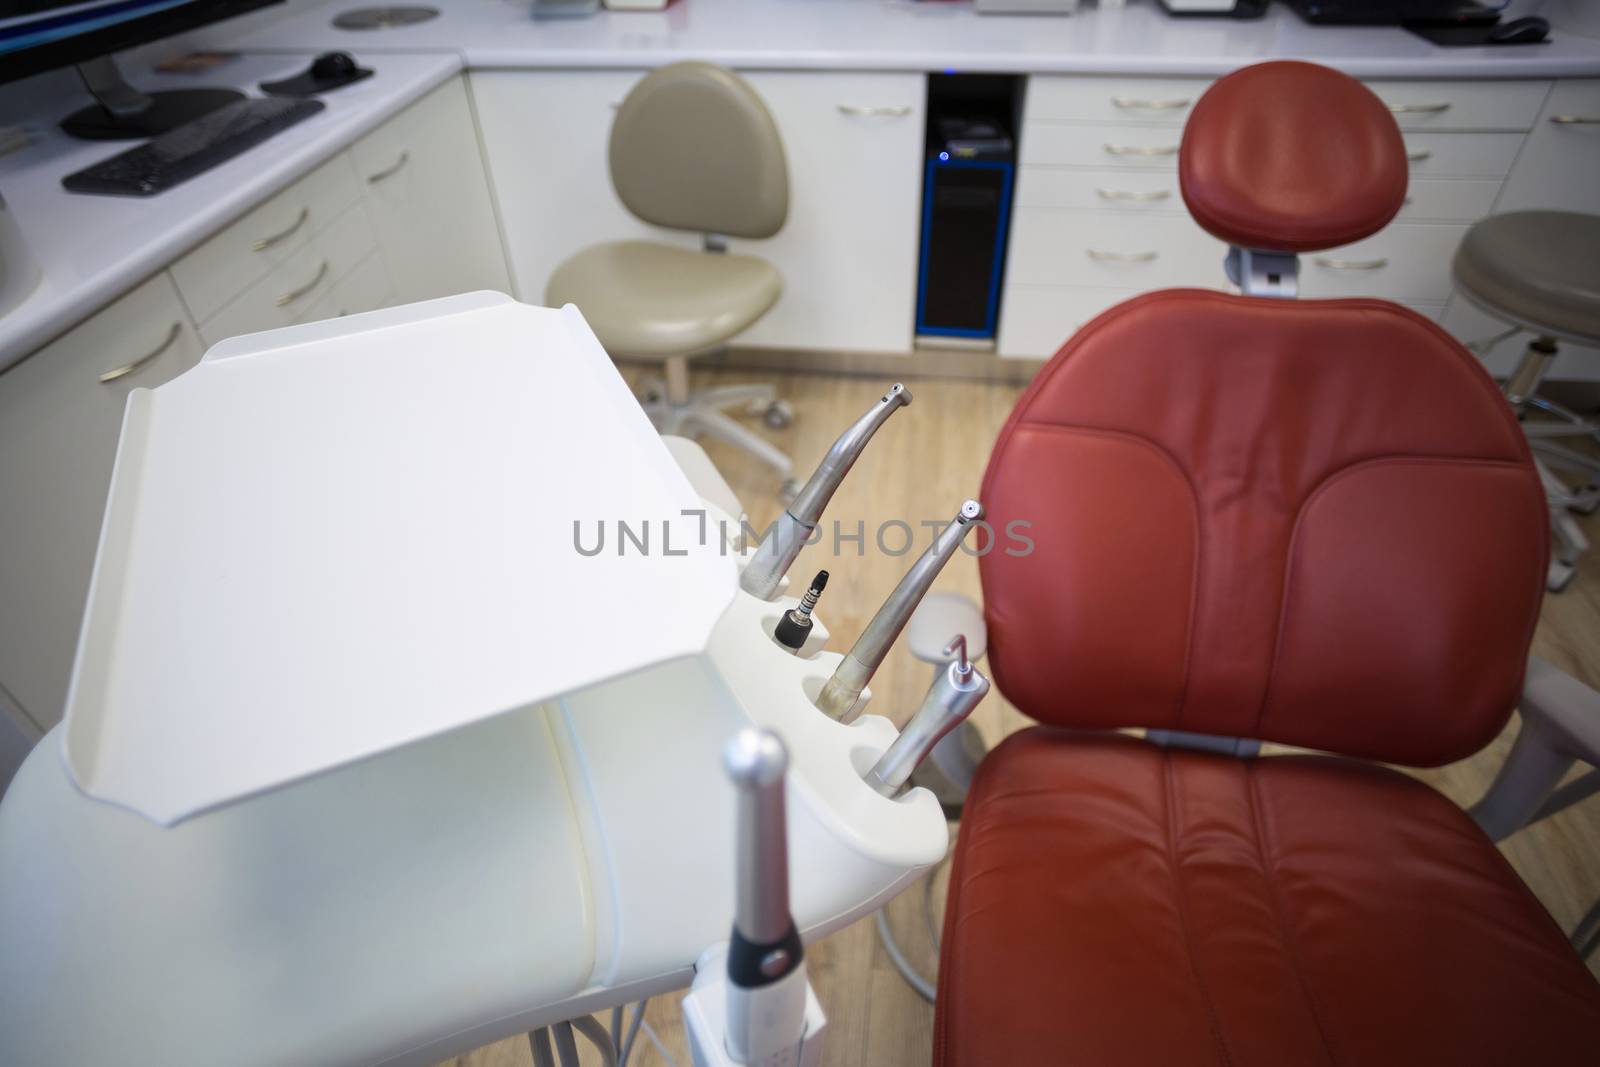 Professional dentistry chair and dentist tools in clinic